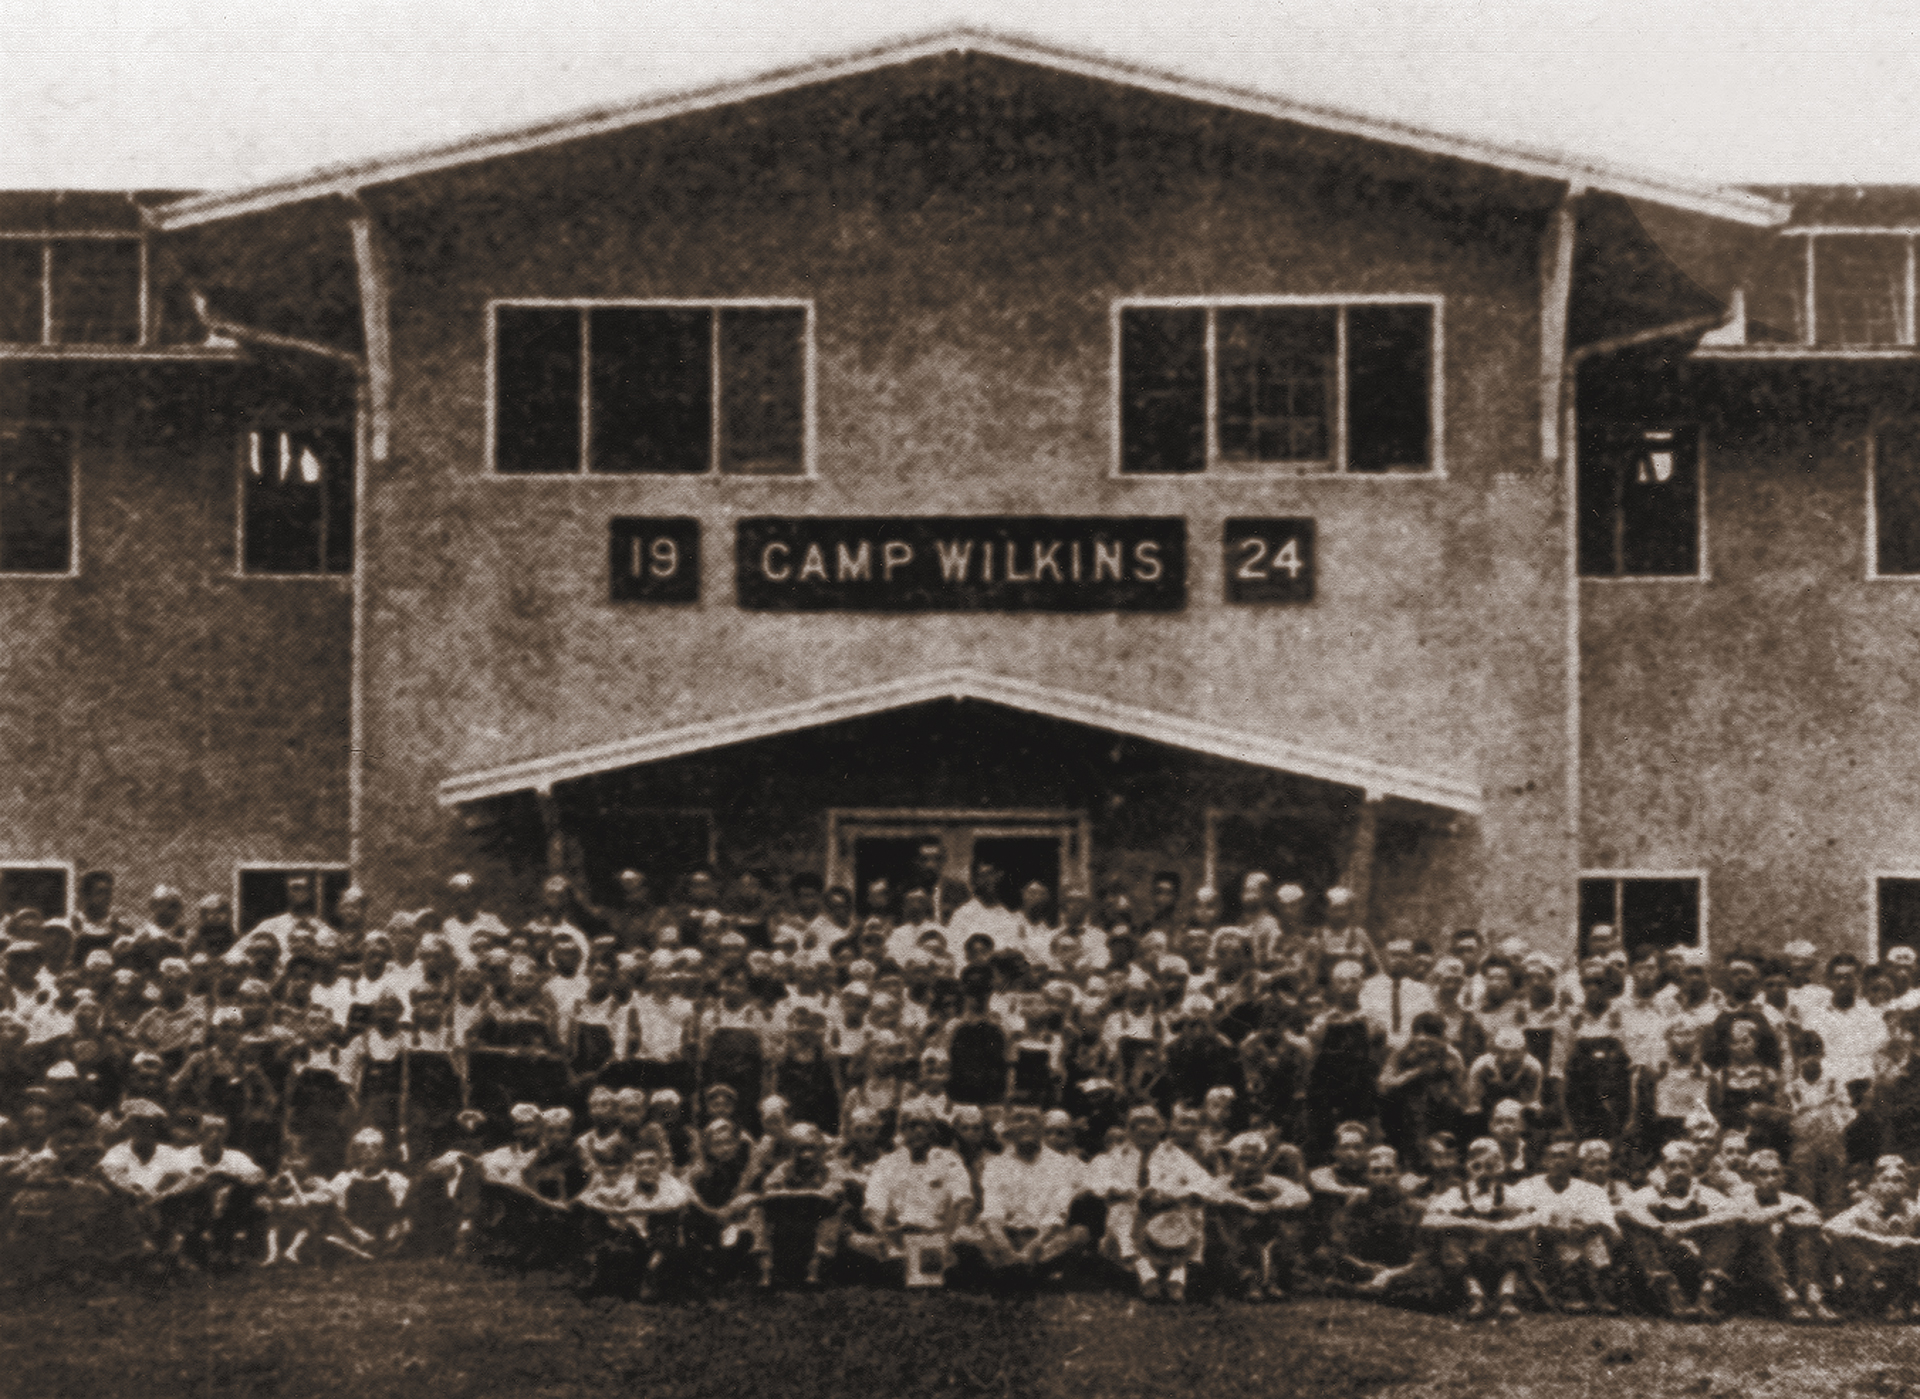 Group photo of Camp Wilkins 4-H campers sitting in front of the building